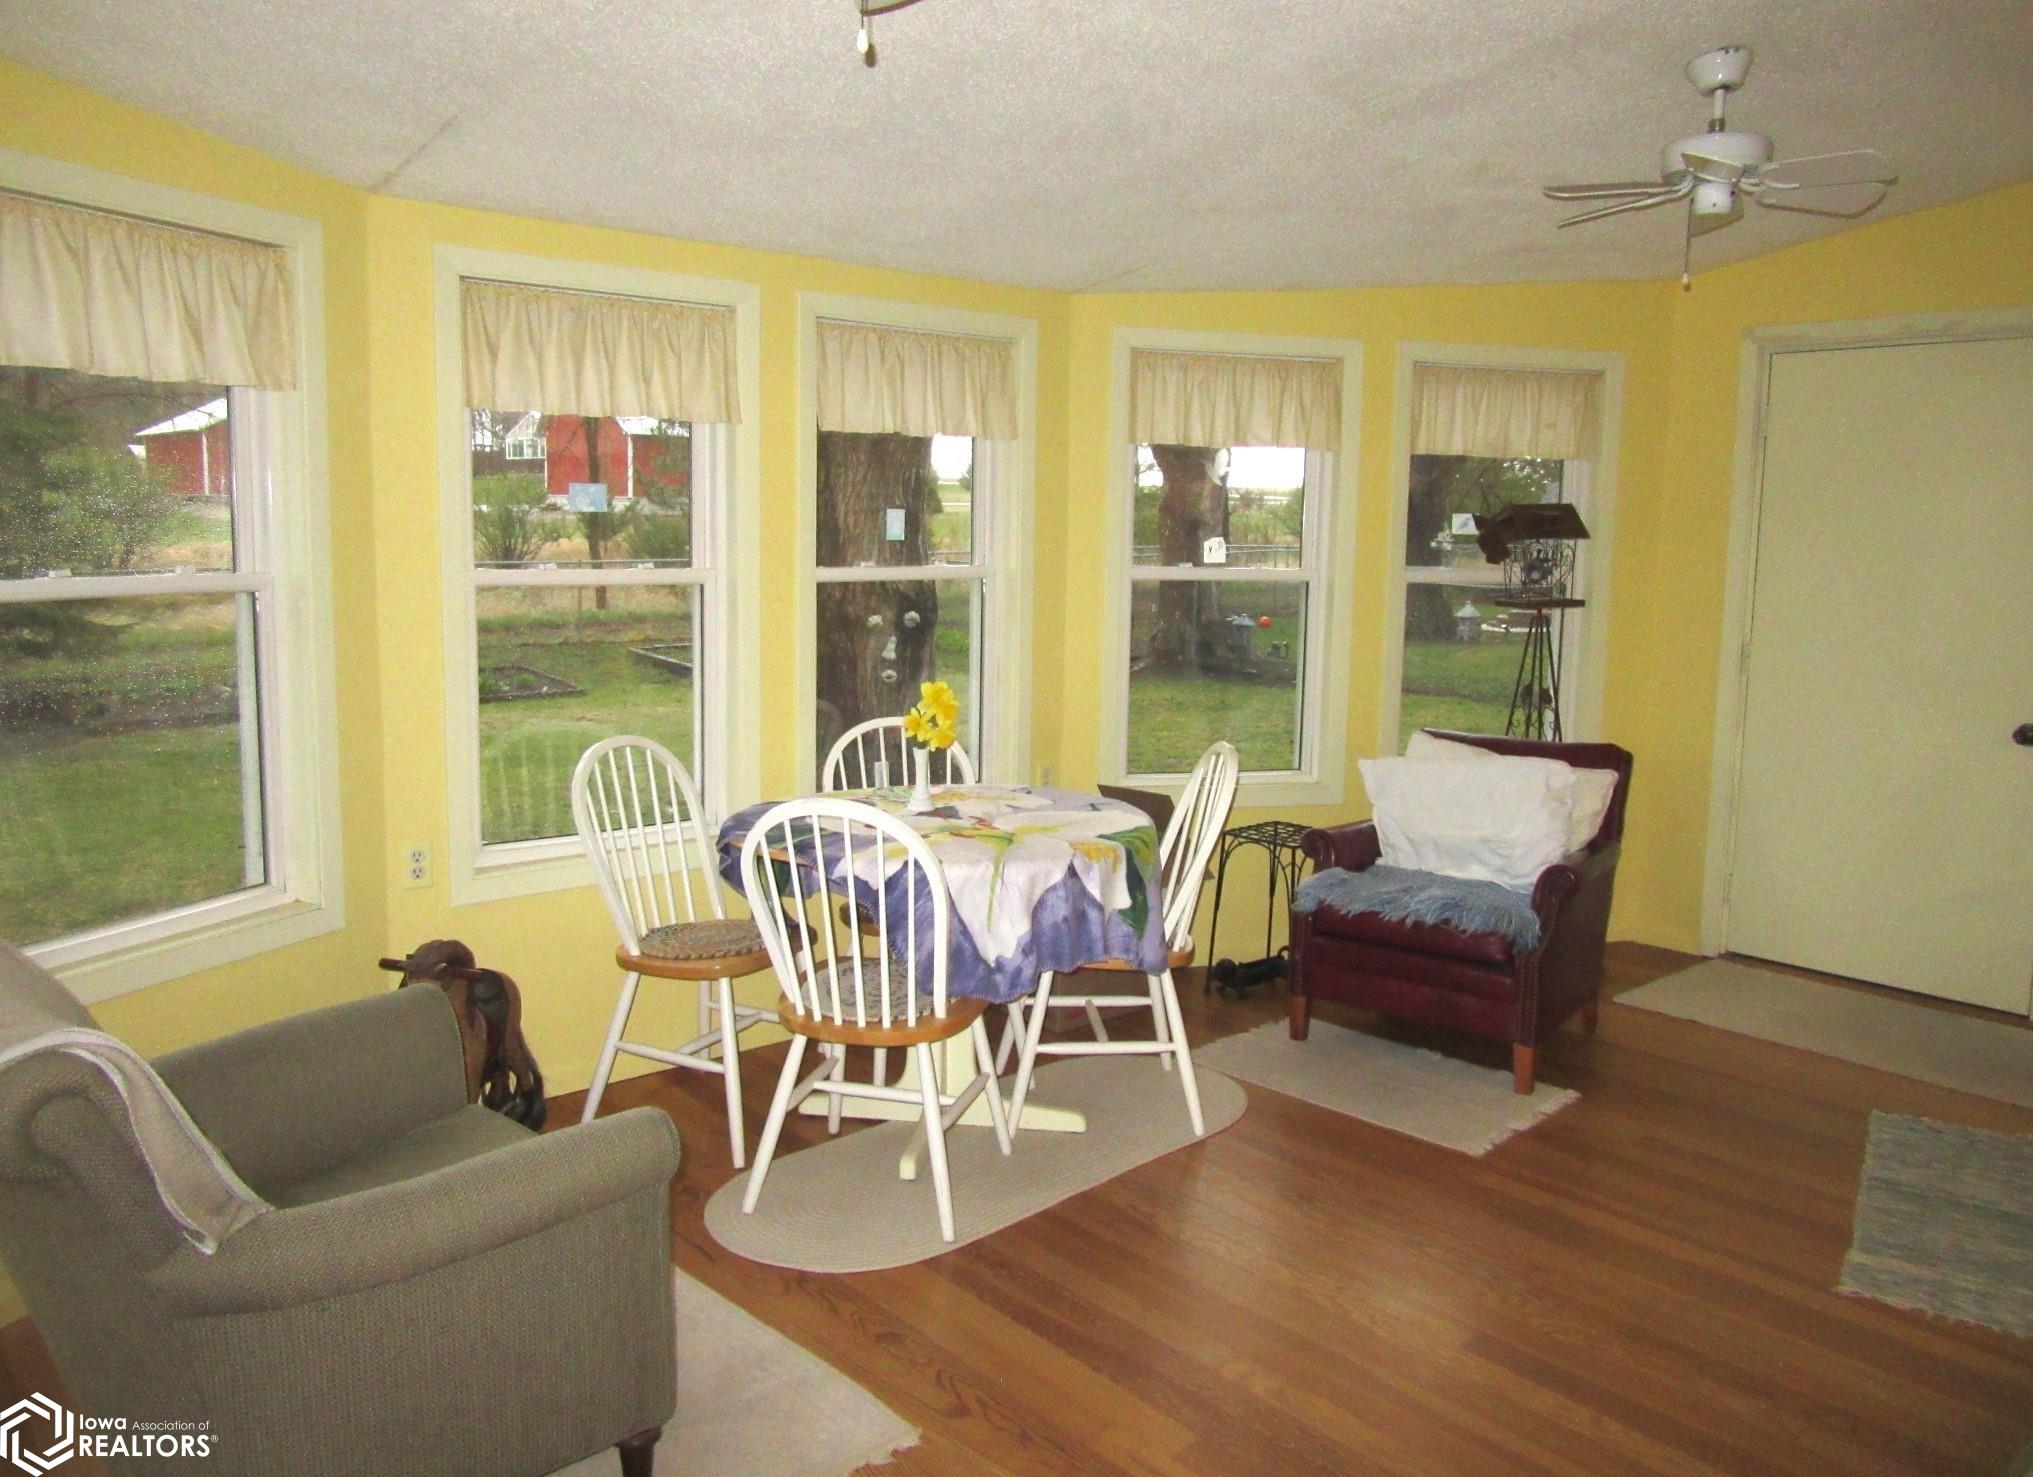 Spacious sun room with ample windows, access to back yard and also to double 